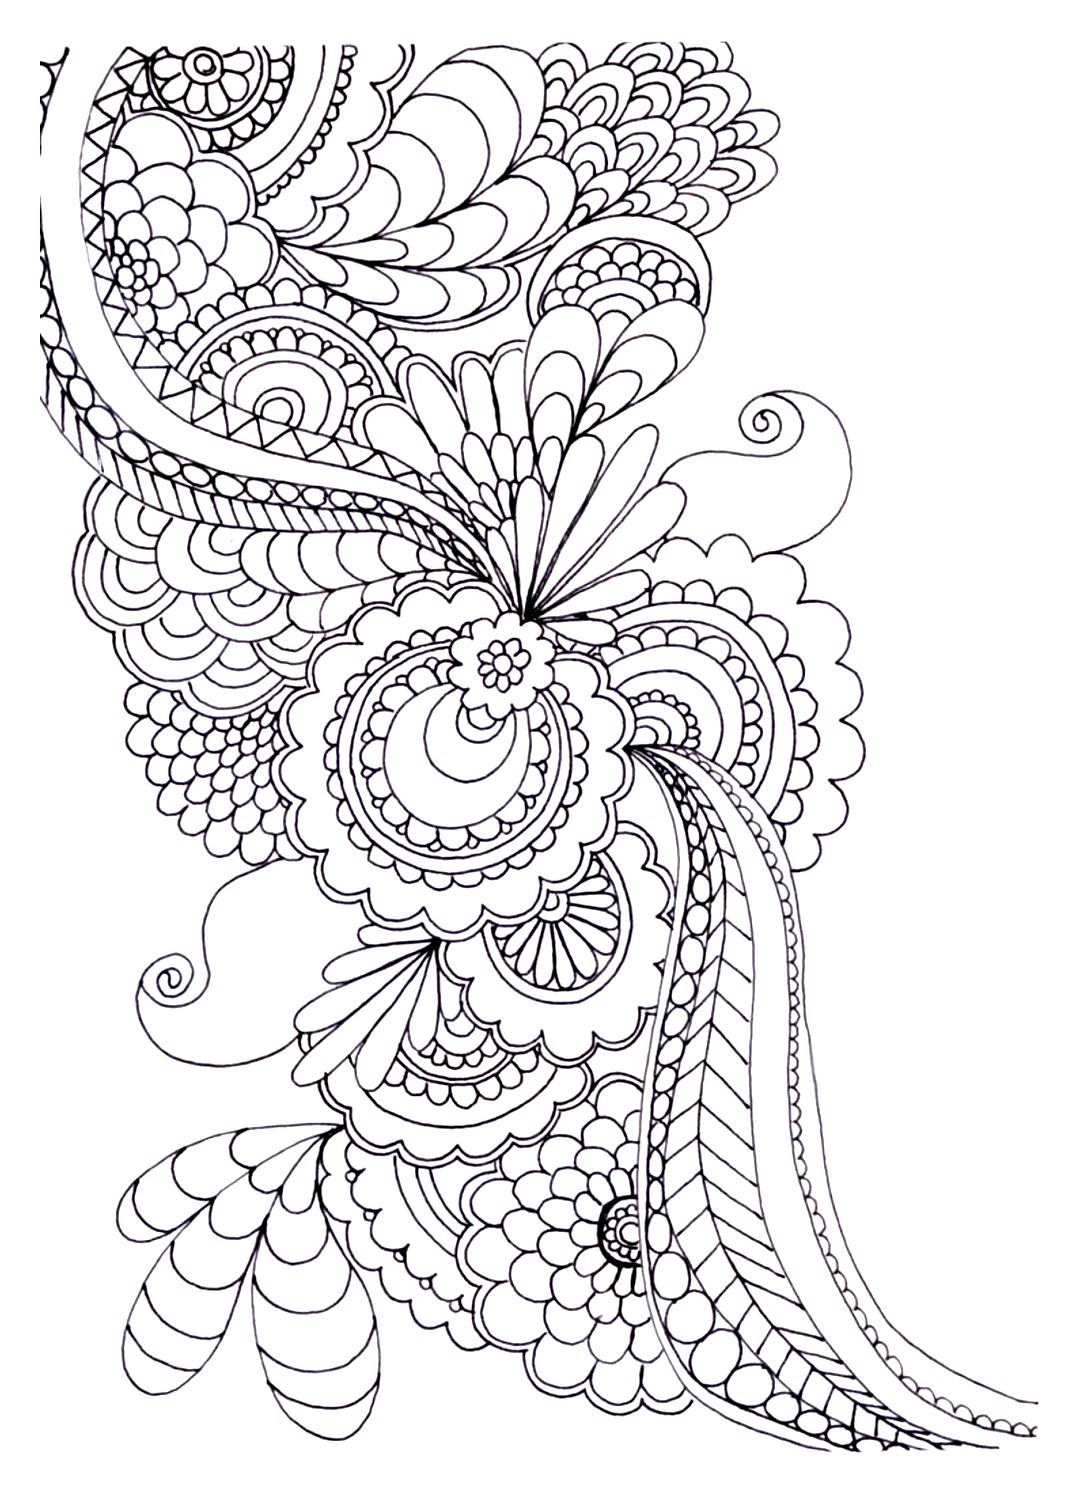 zen-anti-stress-to-print-drawing-flowers-anti-stress-adult-coloring-pages